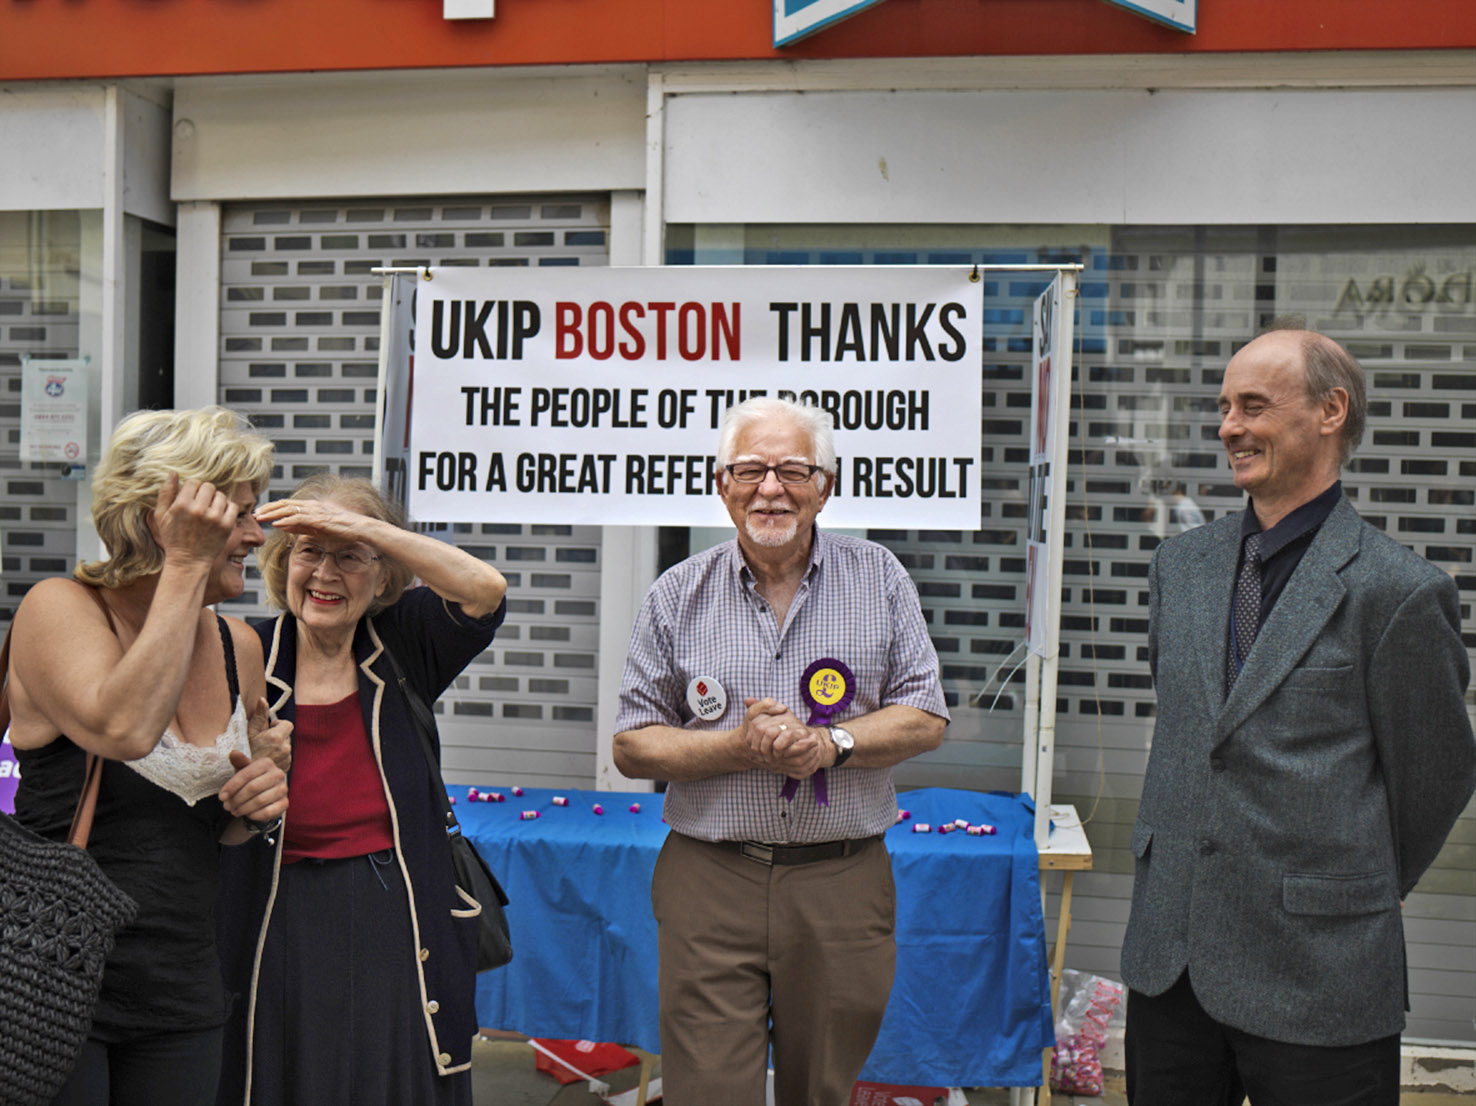 We want Britain to be back to the old way,  says Brian Rush age 72, who handed out sweets (candies) to celebrate the results of the referendum.  The EU is too dictating so we're very happy to have won,  Boston, Lincolnshire, June 25, 2016.